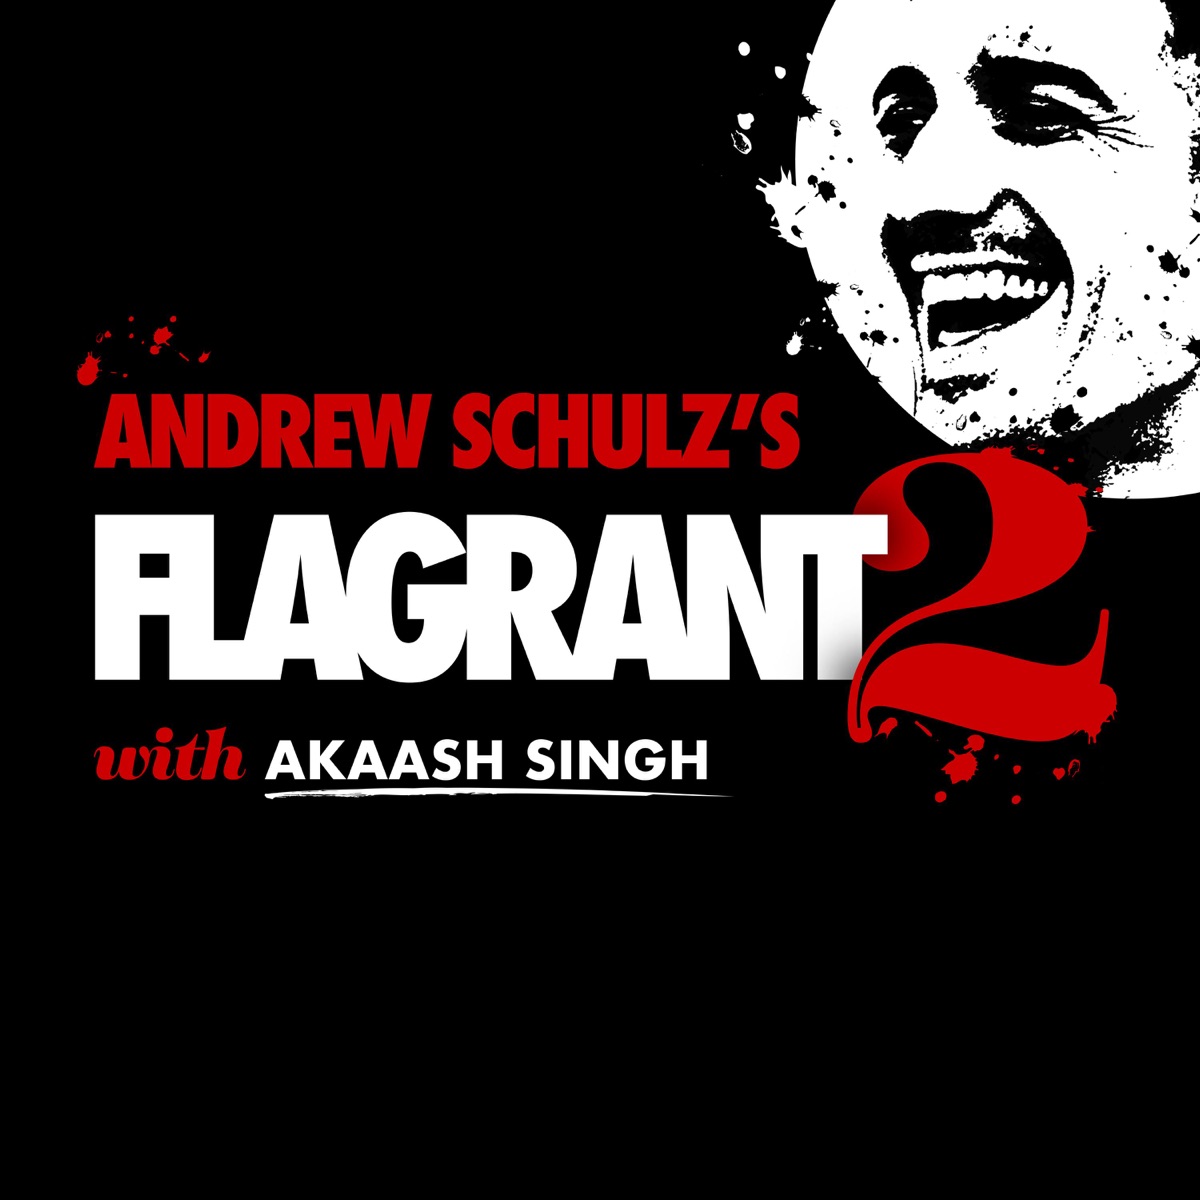 Andrew Schulzs Flagrant with Akaash Singh – Podcast